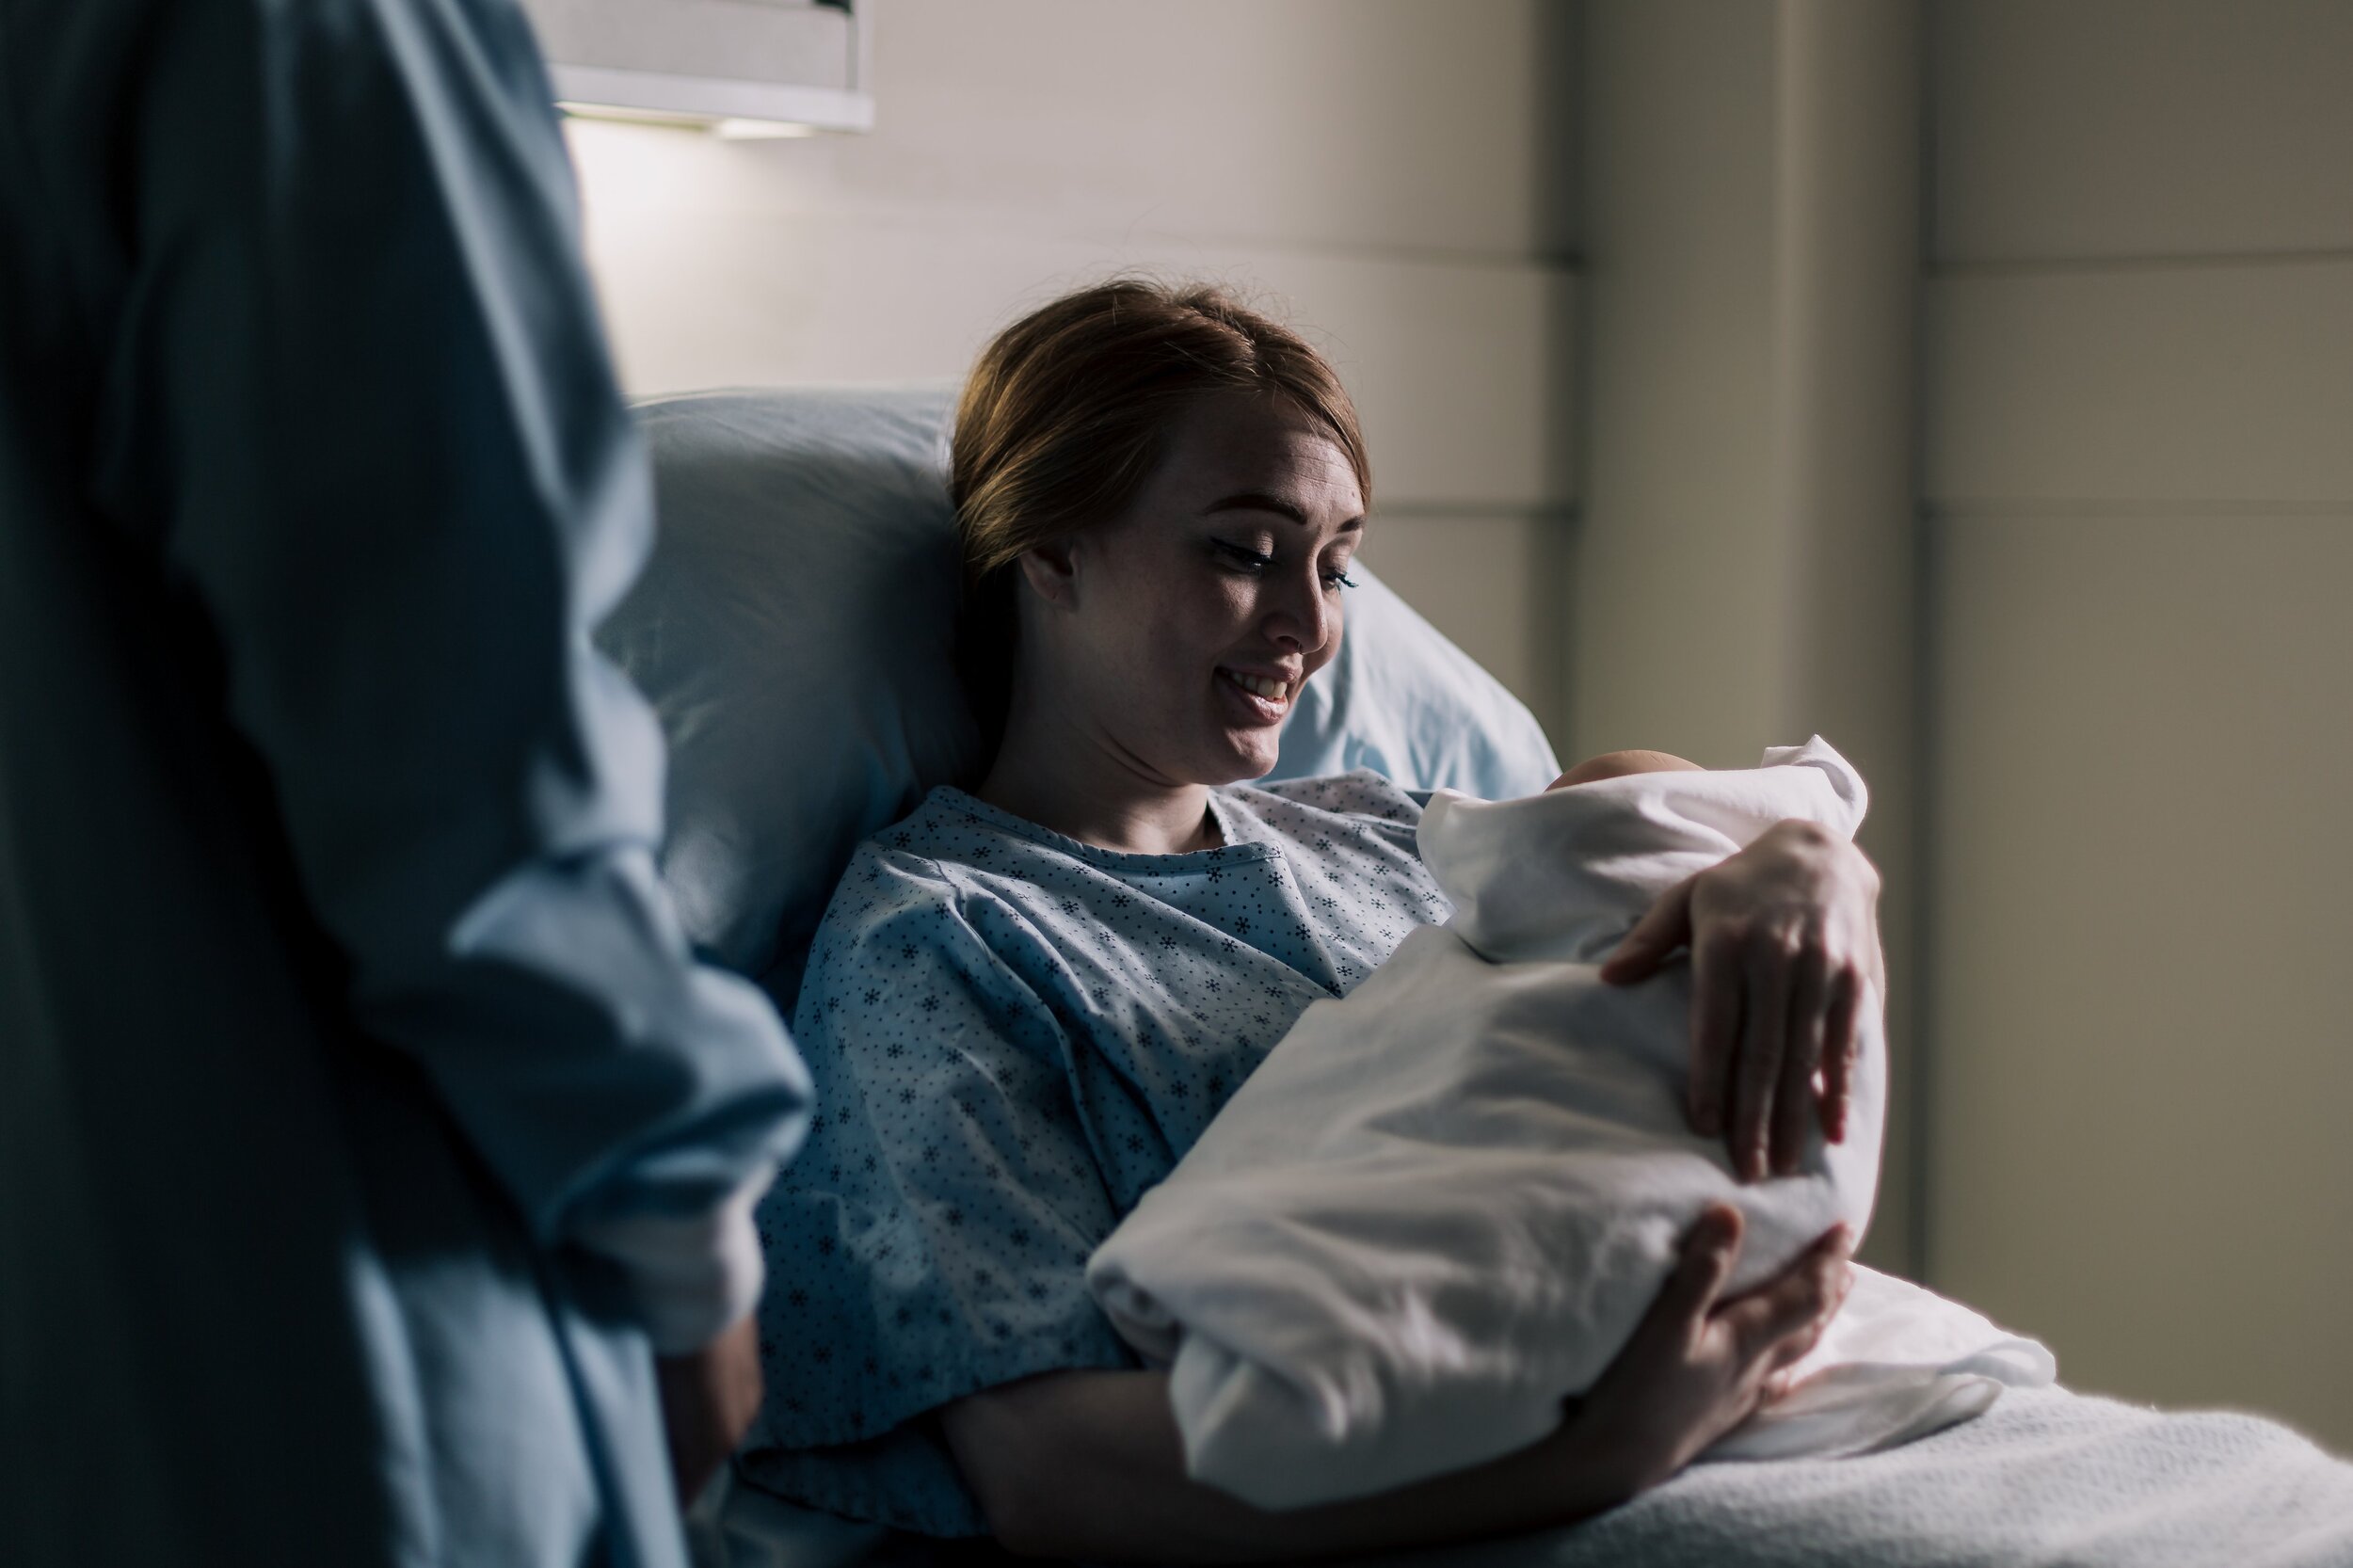 new-mother-smiling-at-her-baby-while-resting-in-hospital-bed.jpg